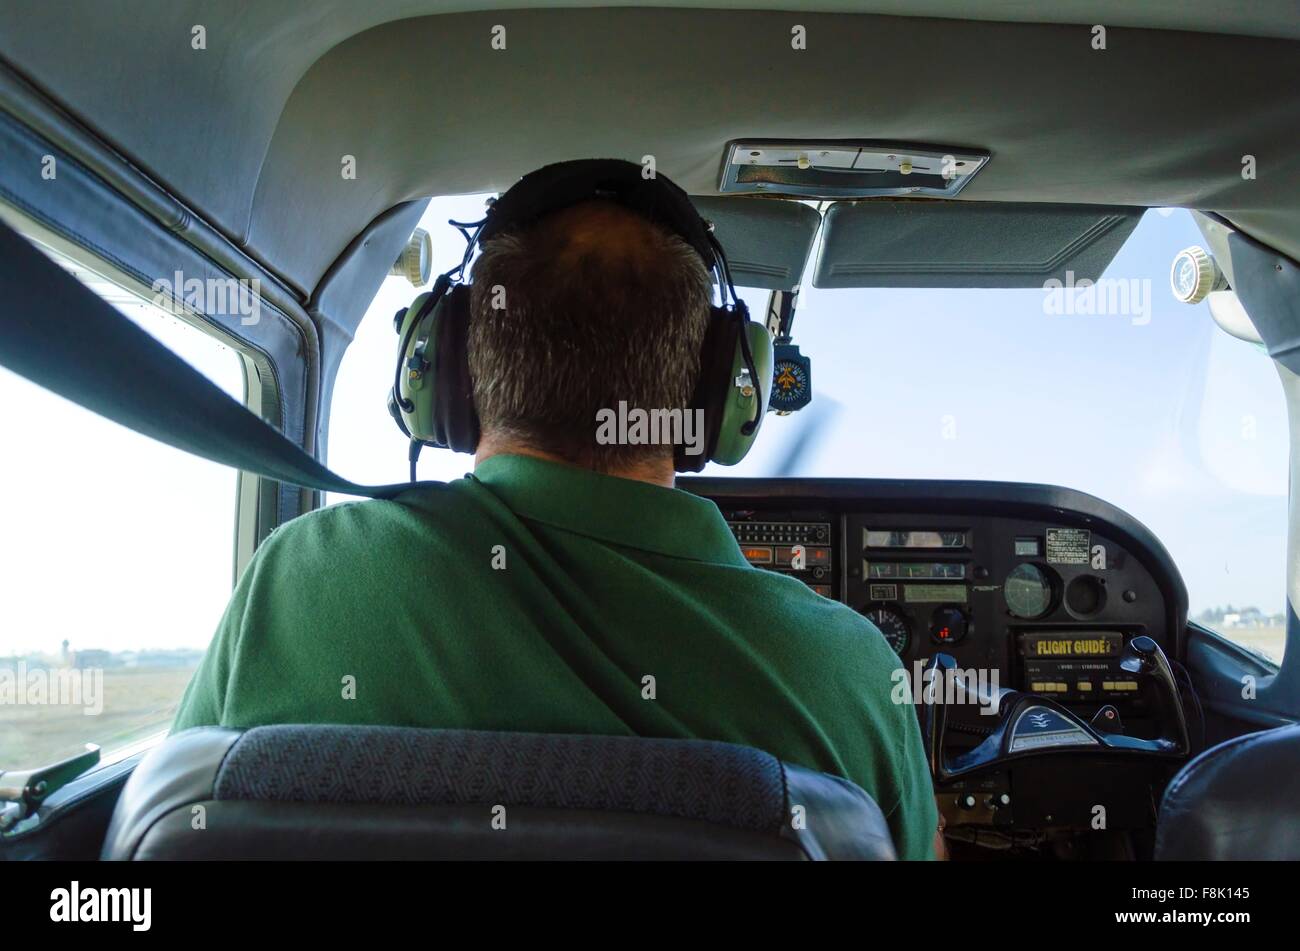 A rear view of a cessna pilot ready for landing. A small airplane with leather seats, with a passenger compartment and small con Stock Photo